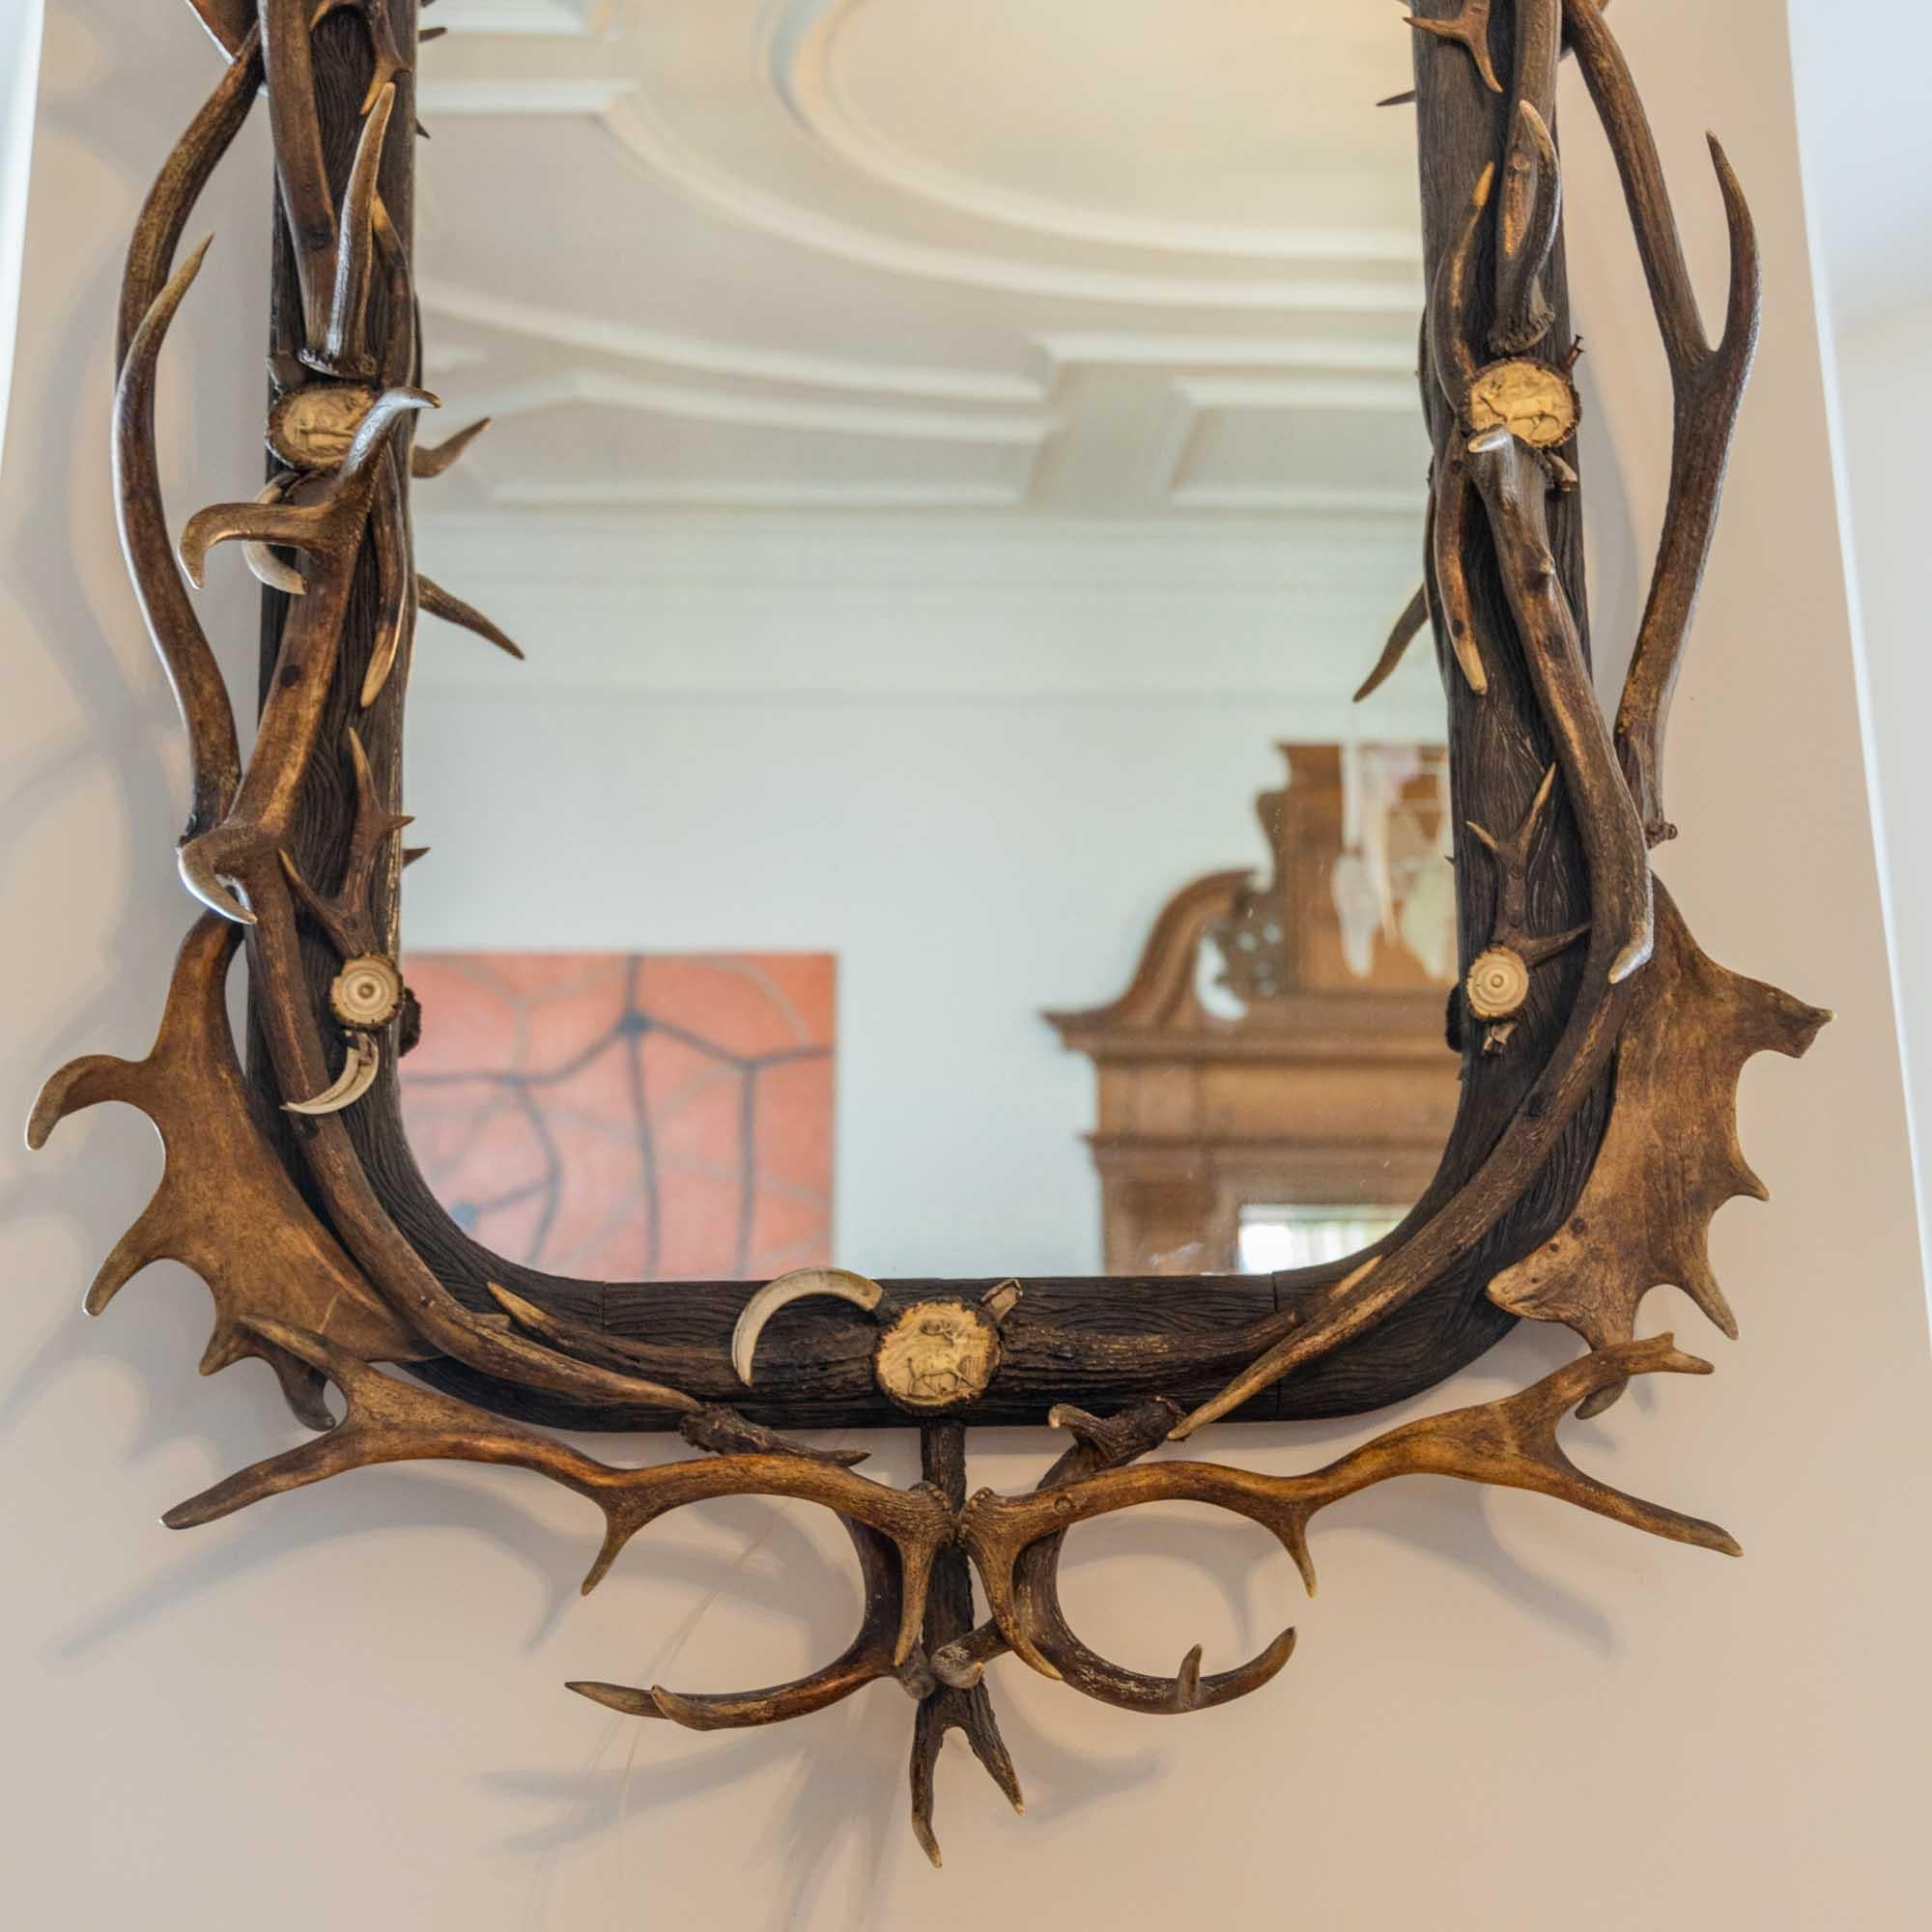 Wall Mirror with Stag Antlers, 2nd half 19th century 4